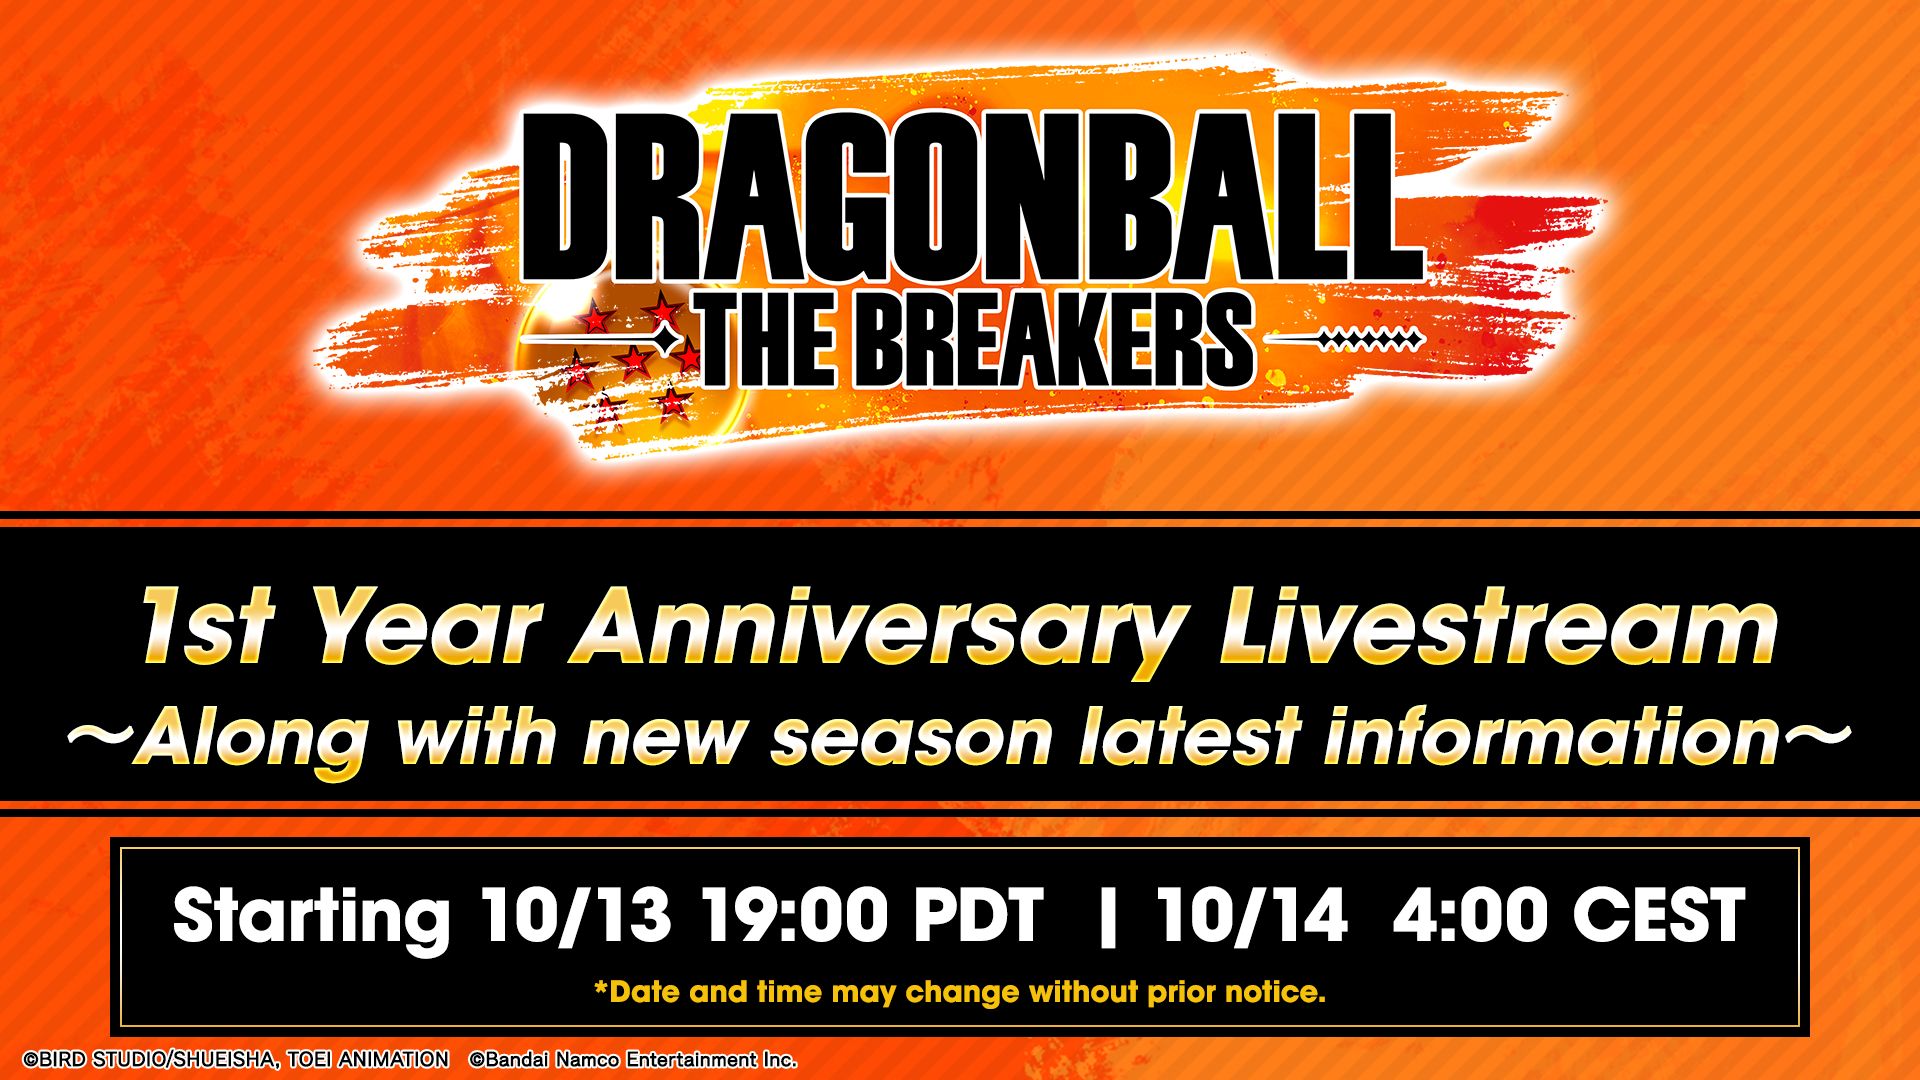 DRAGON BALL: THE BREAKERS Season 4 Coming Soon to Celebrate the Game's 1st Anniversary! Tune In to the 1st Year Anniversary Livestream for New Info!